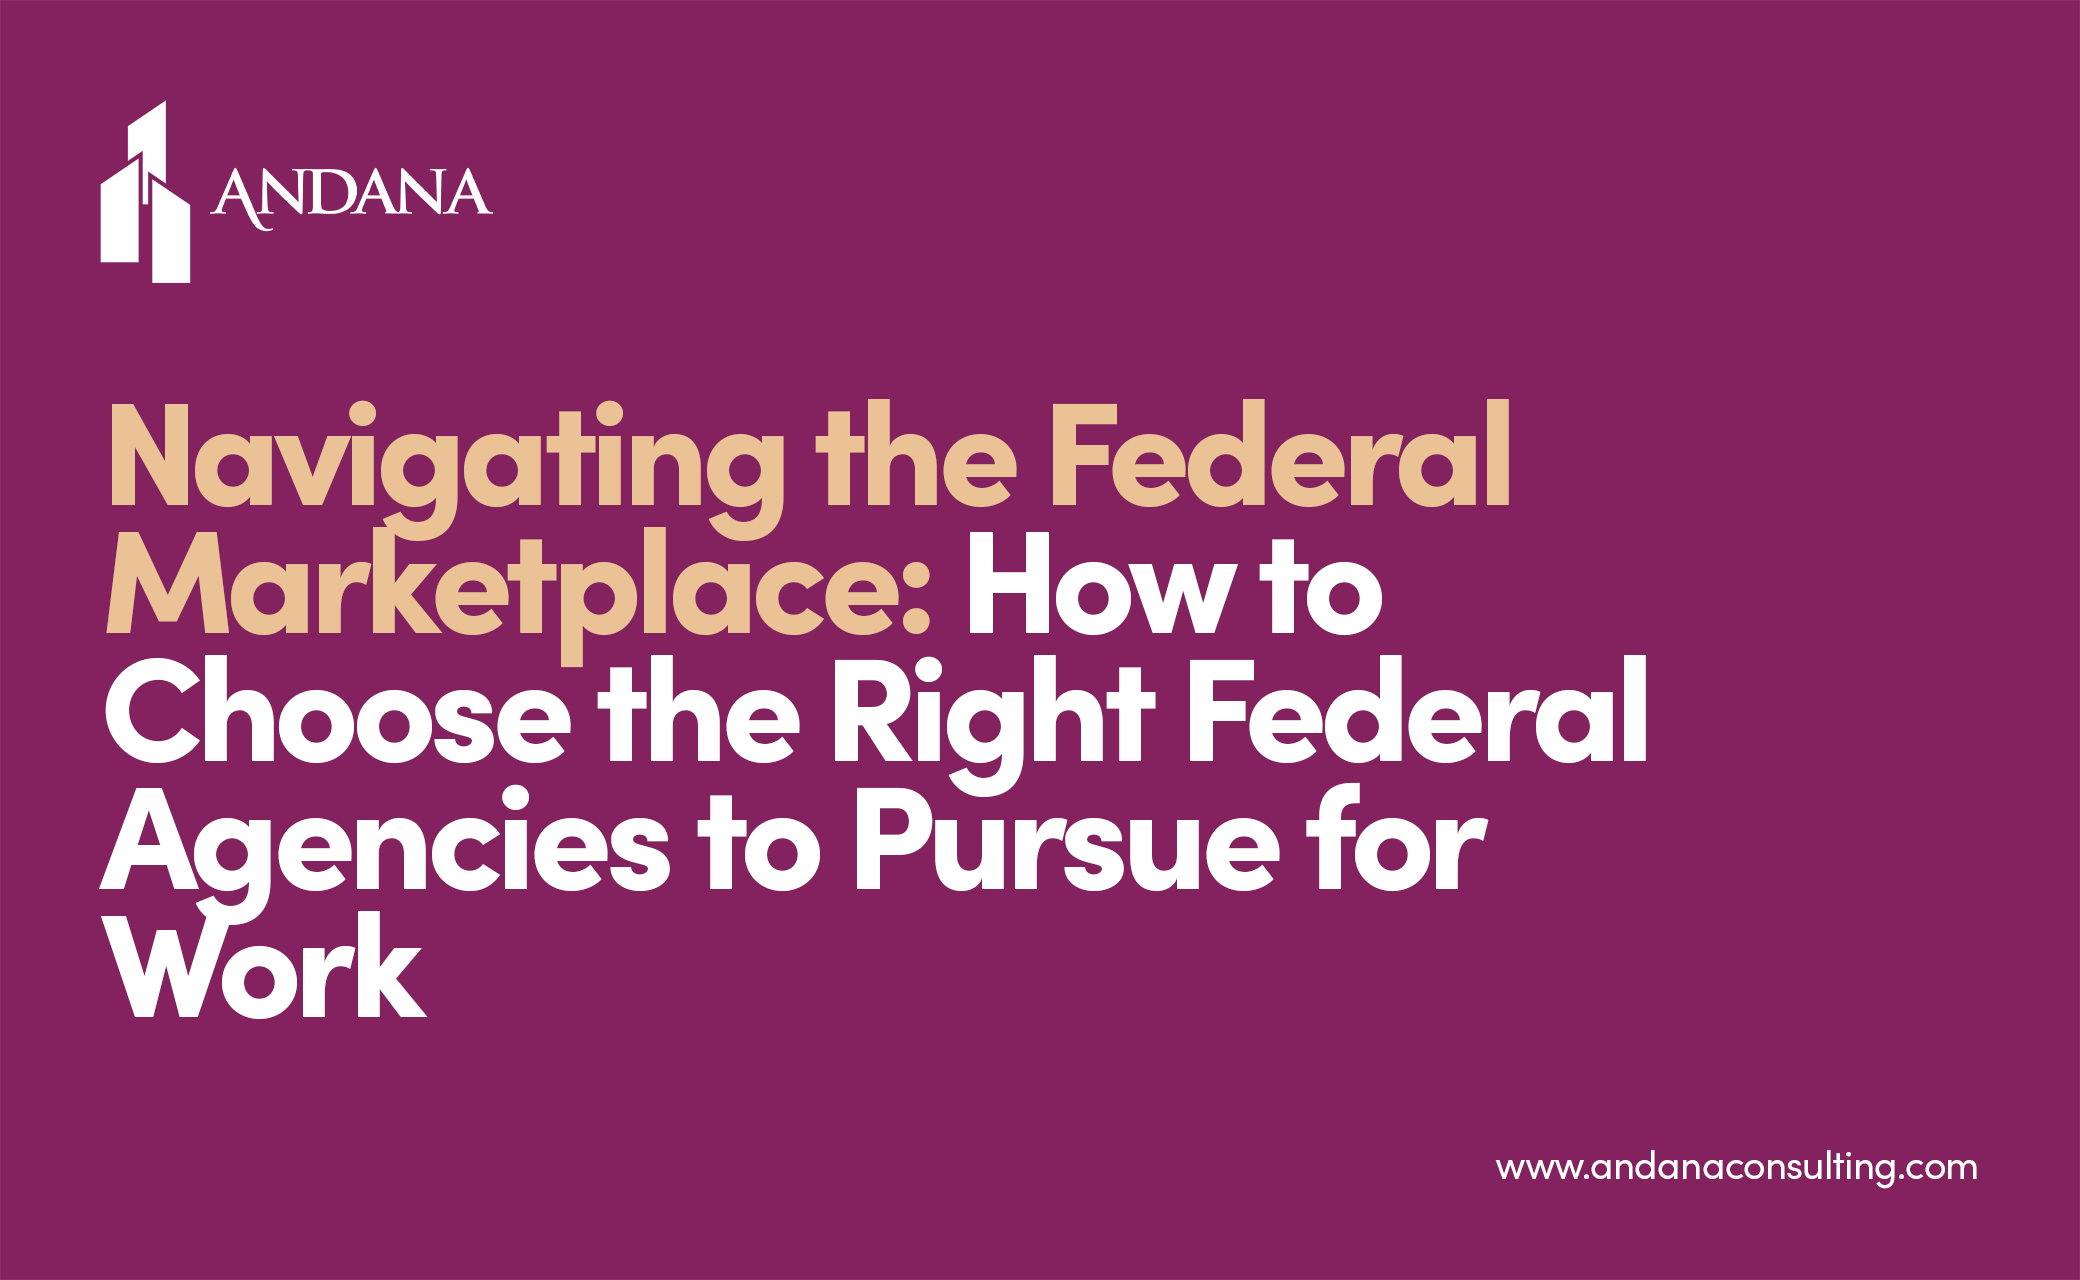 Navigating the Federal Marketplace: How to Choose the Right Federal Agencies to Pursue for Work